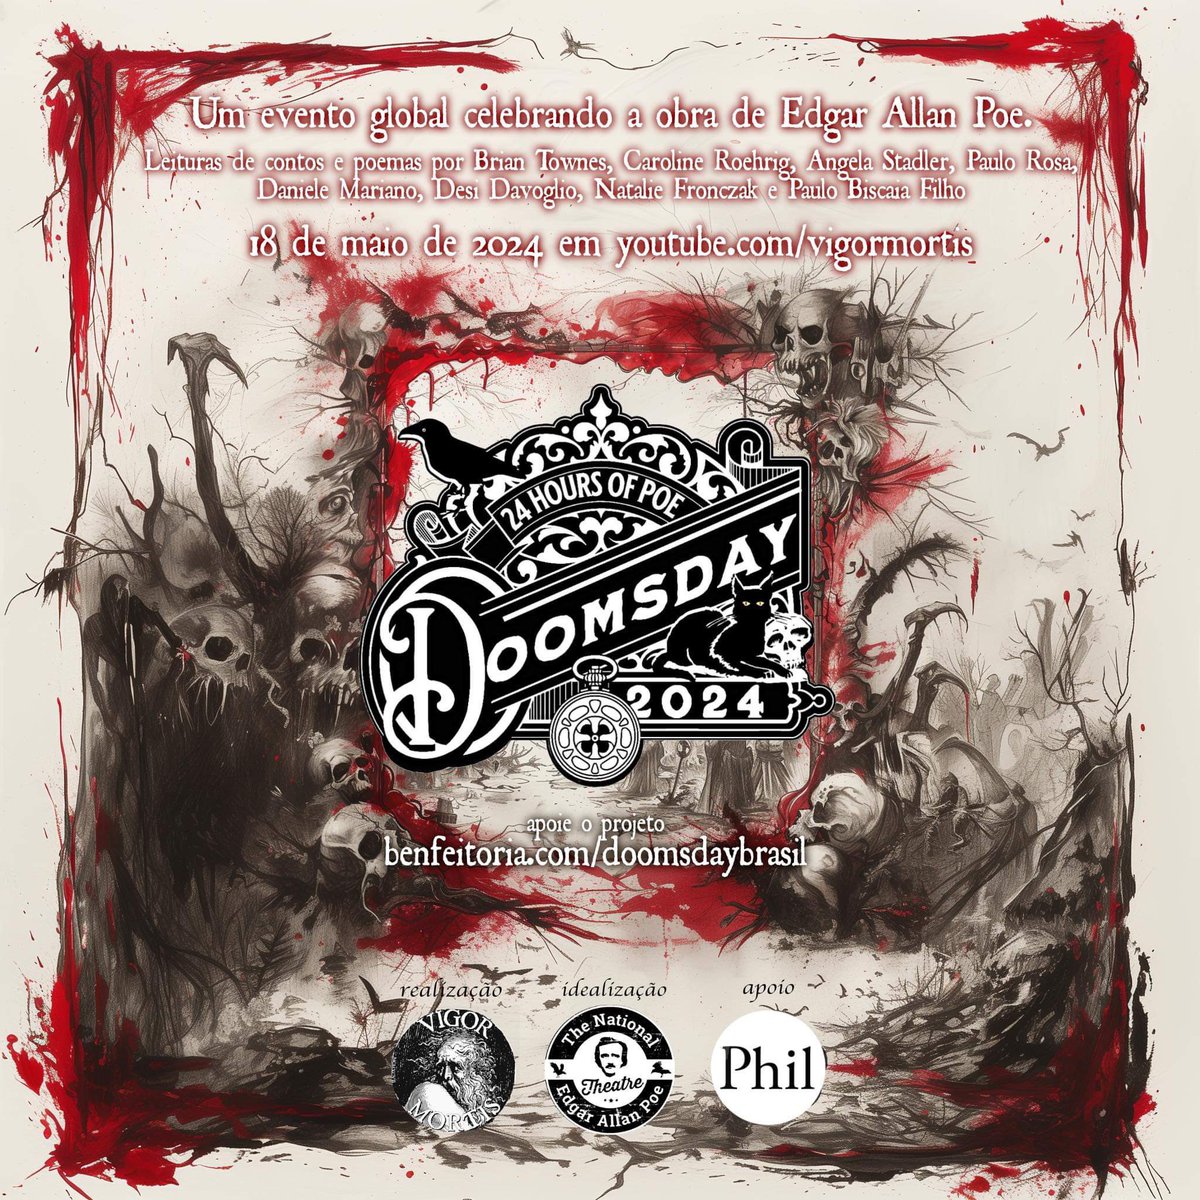 The Doomsday 2024 Edgar Allan Poe Readathon is coming to Brazil! 24 hours of Poe, nonstop, May 18-19. Vigor Mortis, Brazil’s top horror company, is now in! Baltimore, Brazil; Italy and UK, all reading Poe on the same day. Welcome to the celebration! benfeitoria.com/projeto/doomsd…